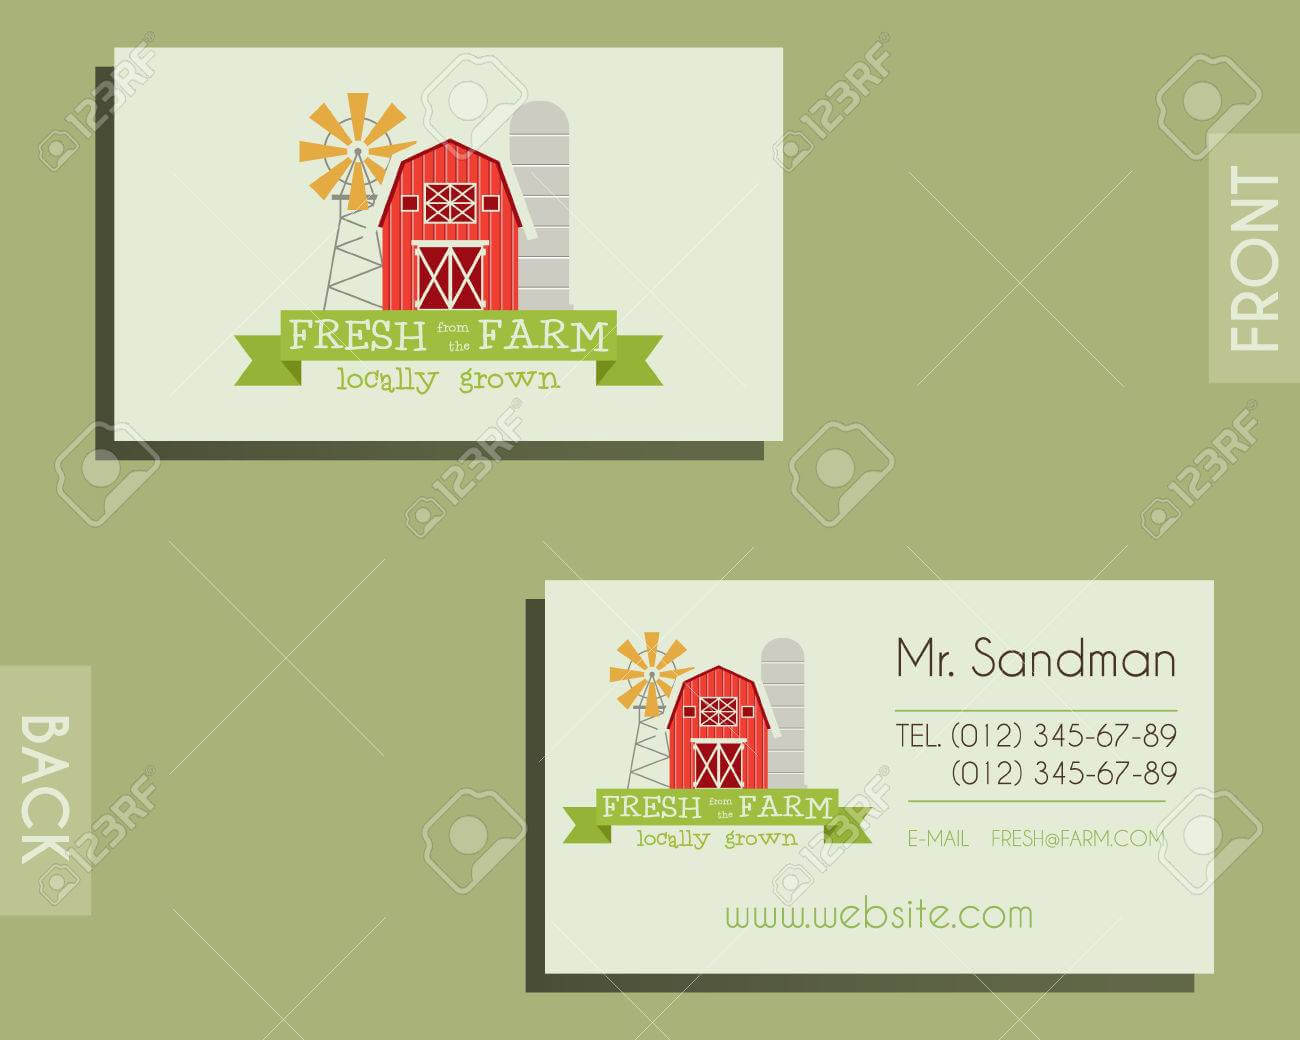 Eco, Organic Visiting Card Template. For Natural Shop, Farm Products And  Other Bio, Organic Business. Ecology Theme. Eco Design. Vector Illustration Pertaining To Bio Card Template